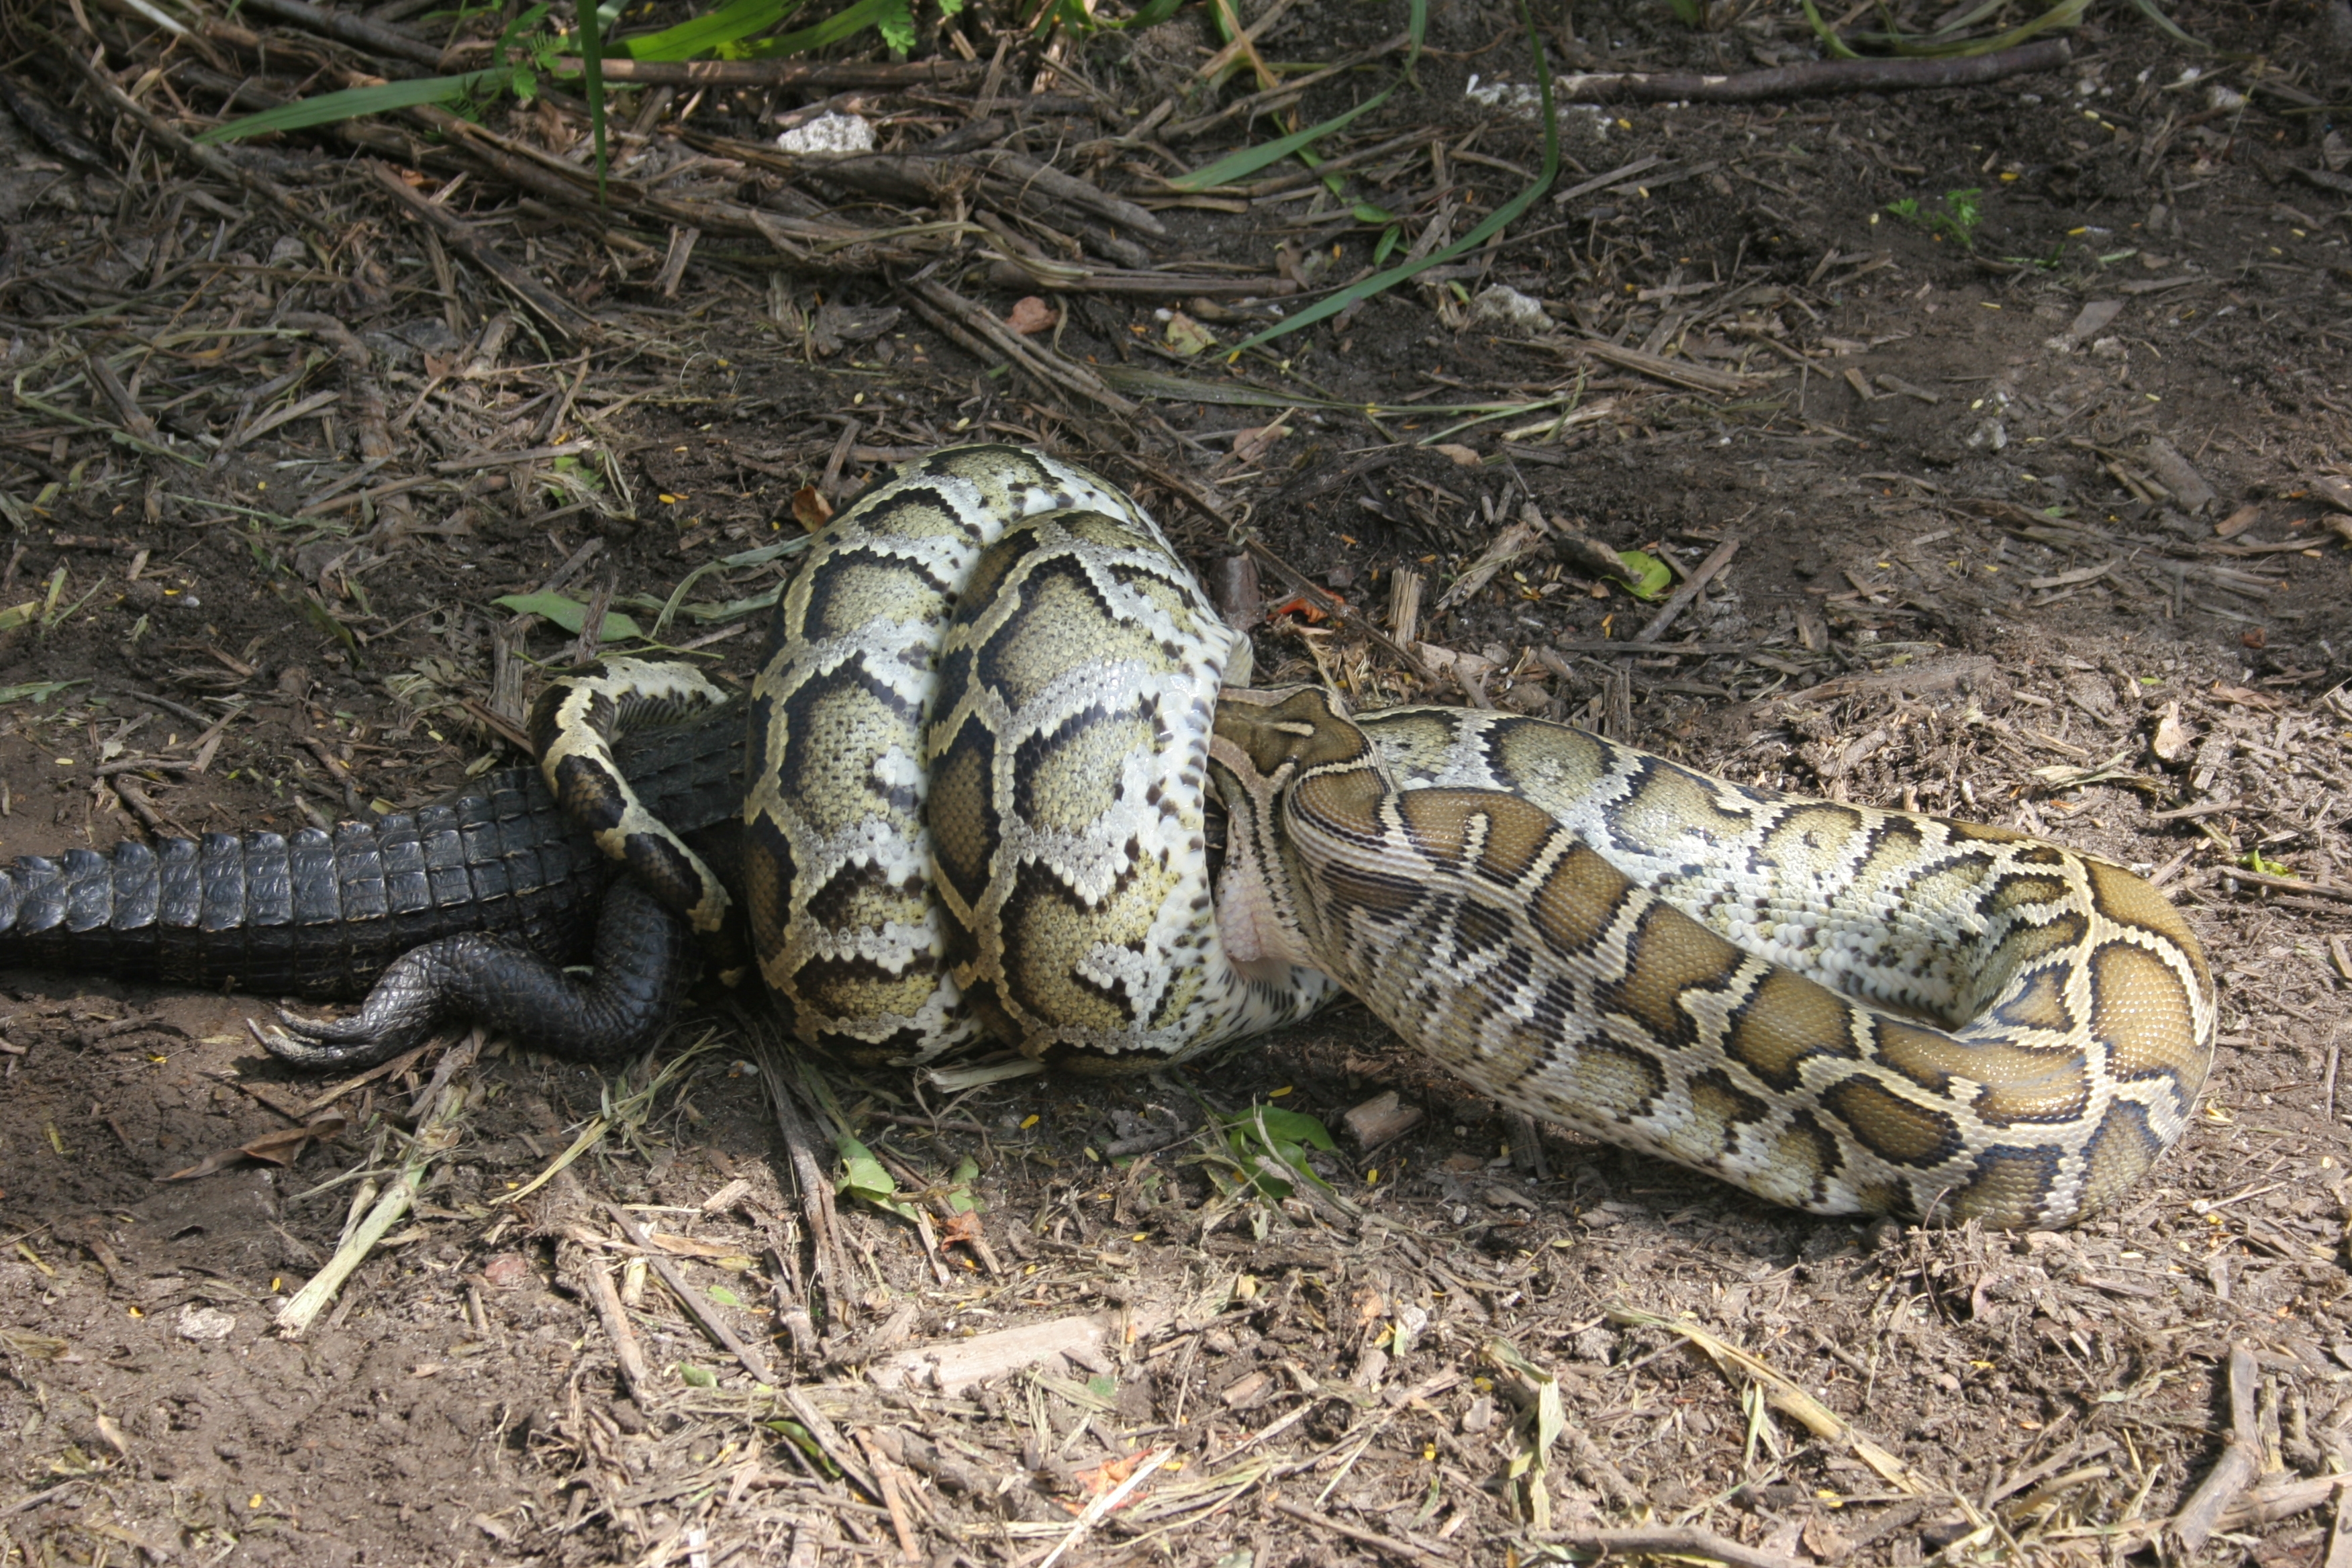 What Problems Are Burmese Pythons Causing in the Everglades?